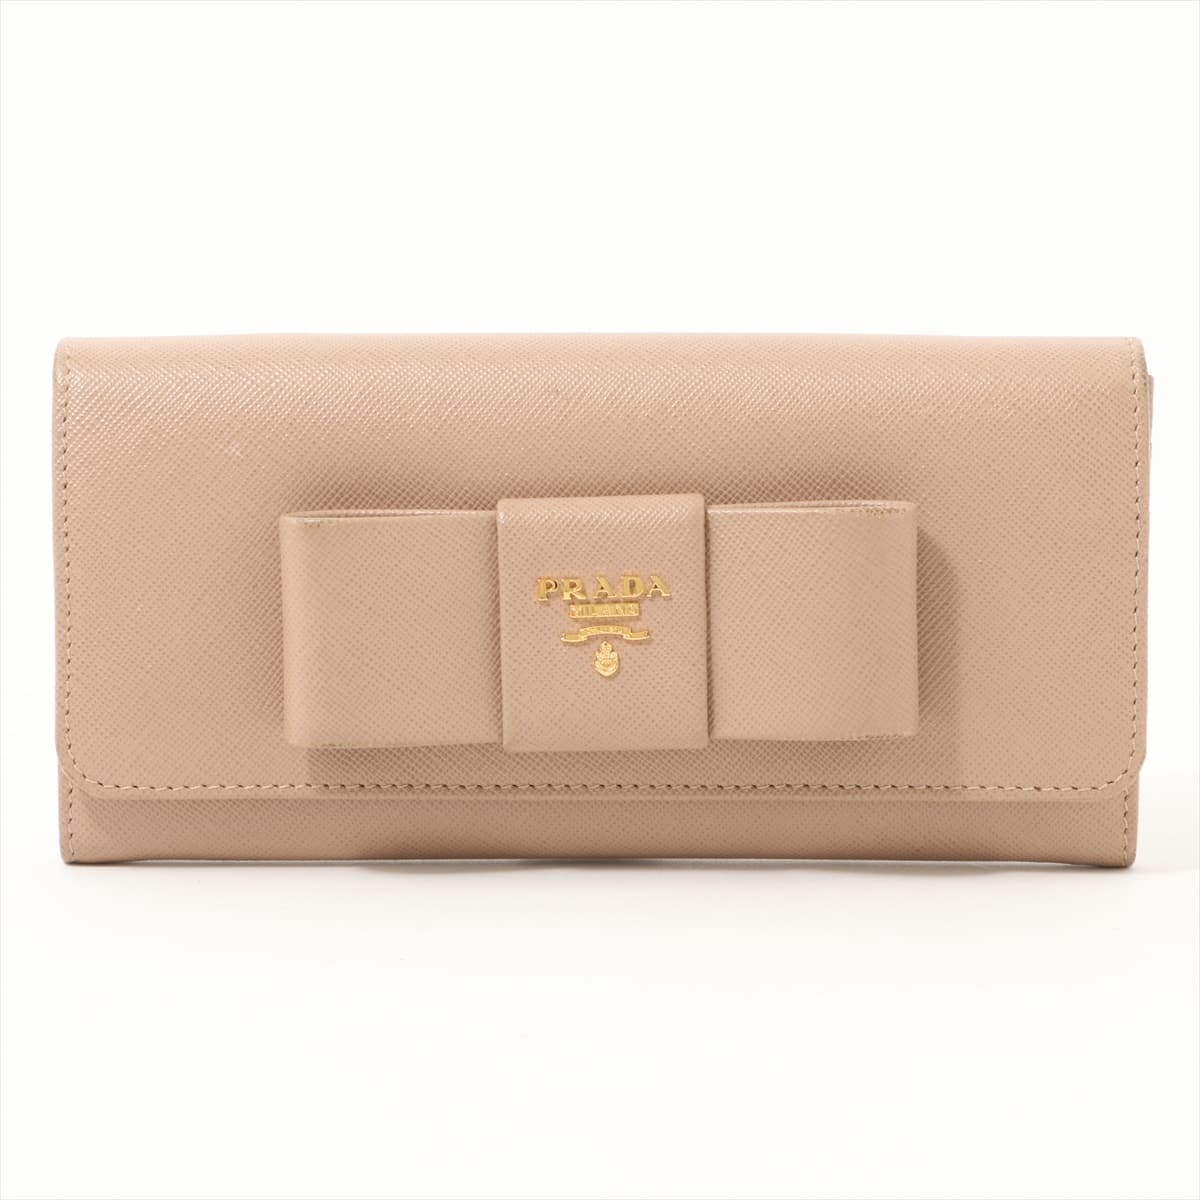 Prada Saffiano Fiocco 1MH132 Leather Wallet Pink beige